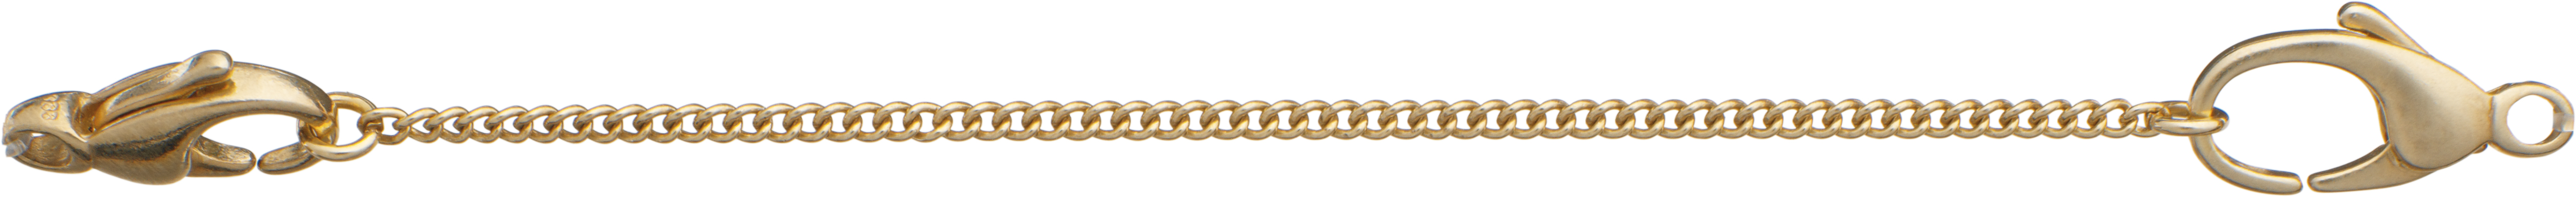 Safety chain curb double length 70,00mm, with open jump rings